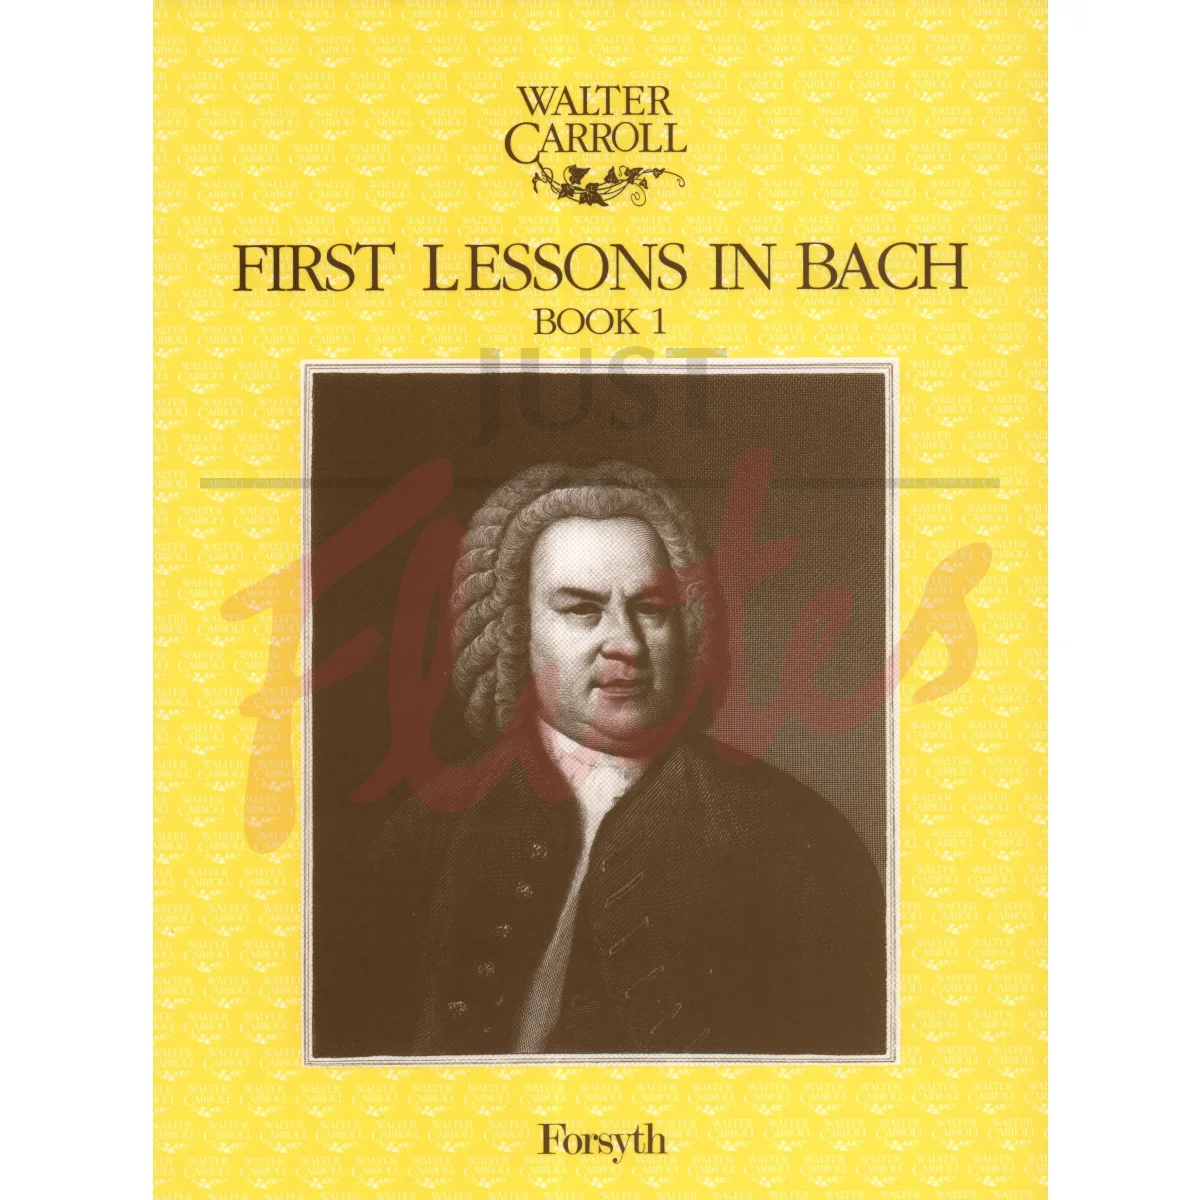 First Lessons in Bach, Book 1